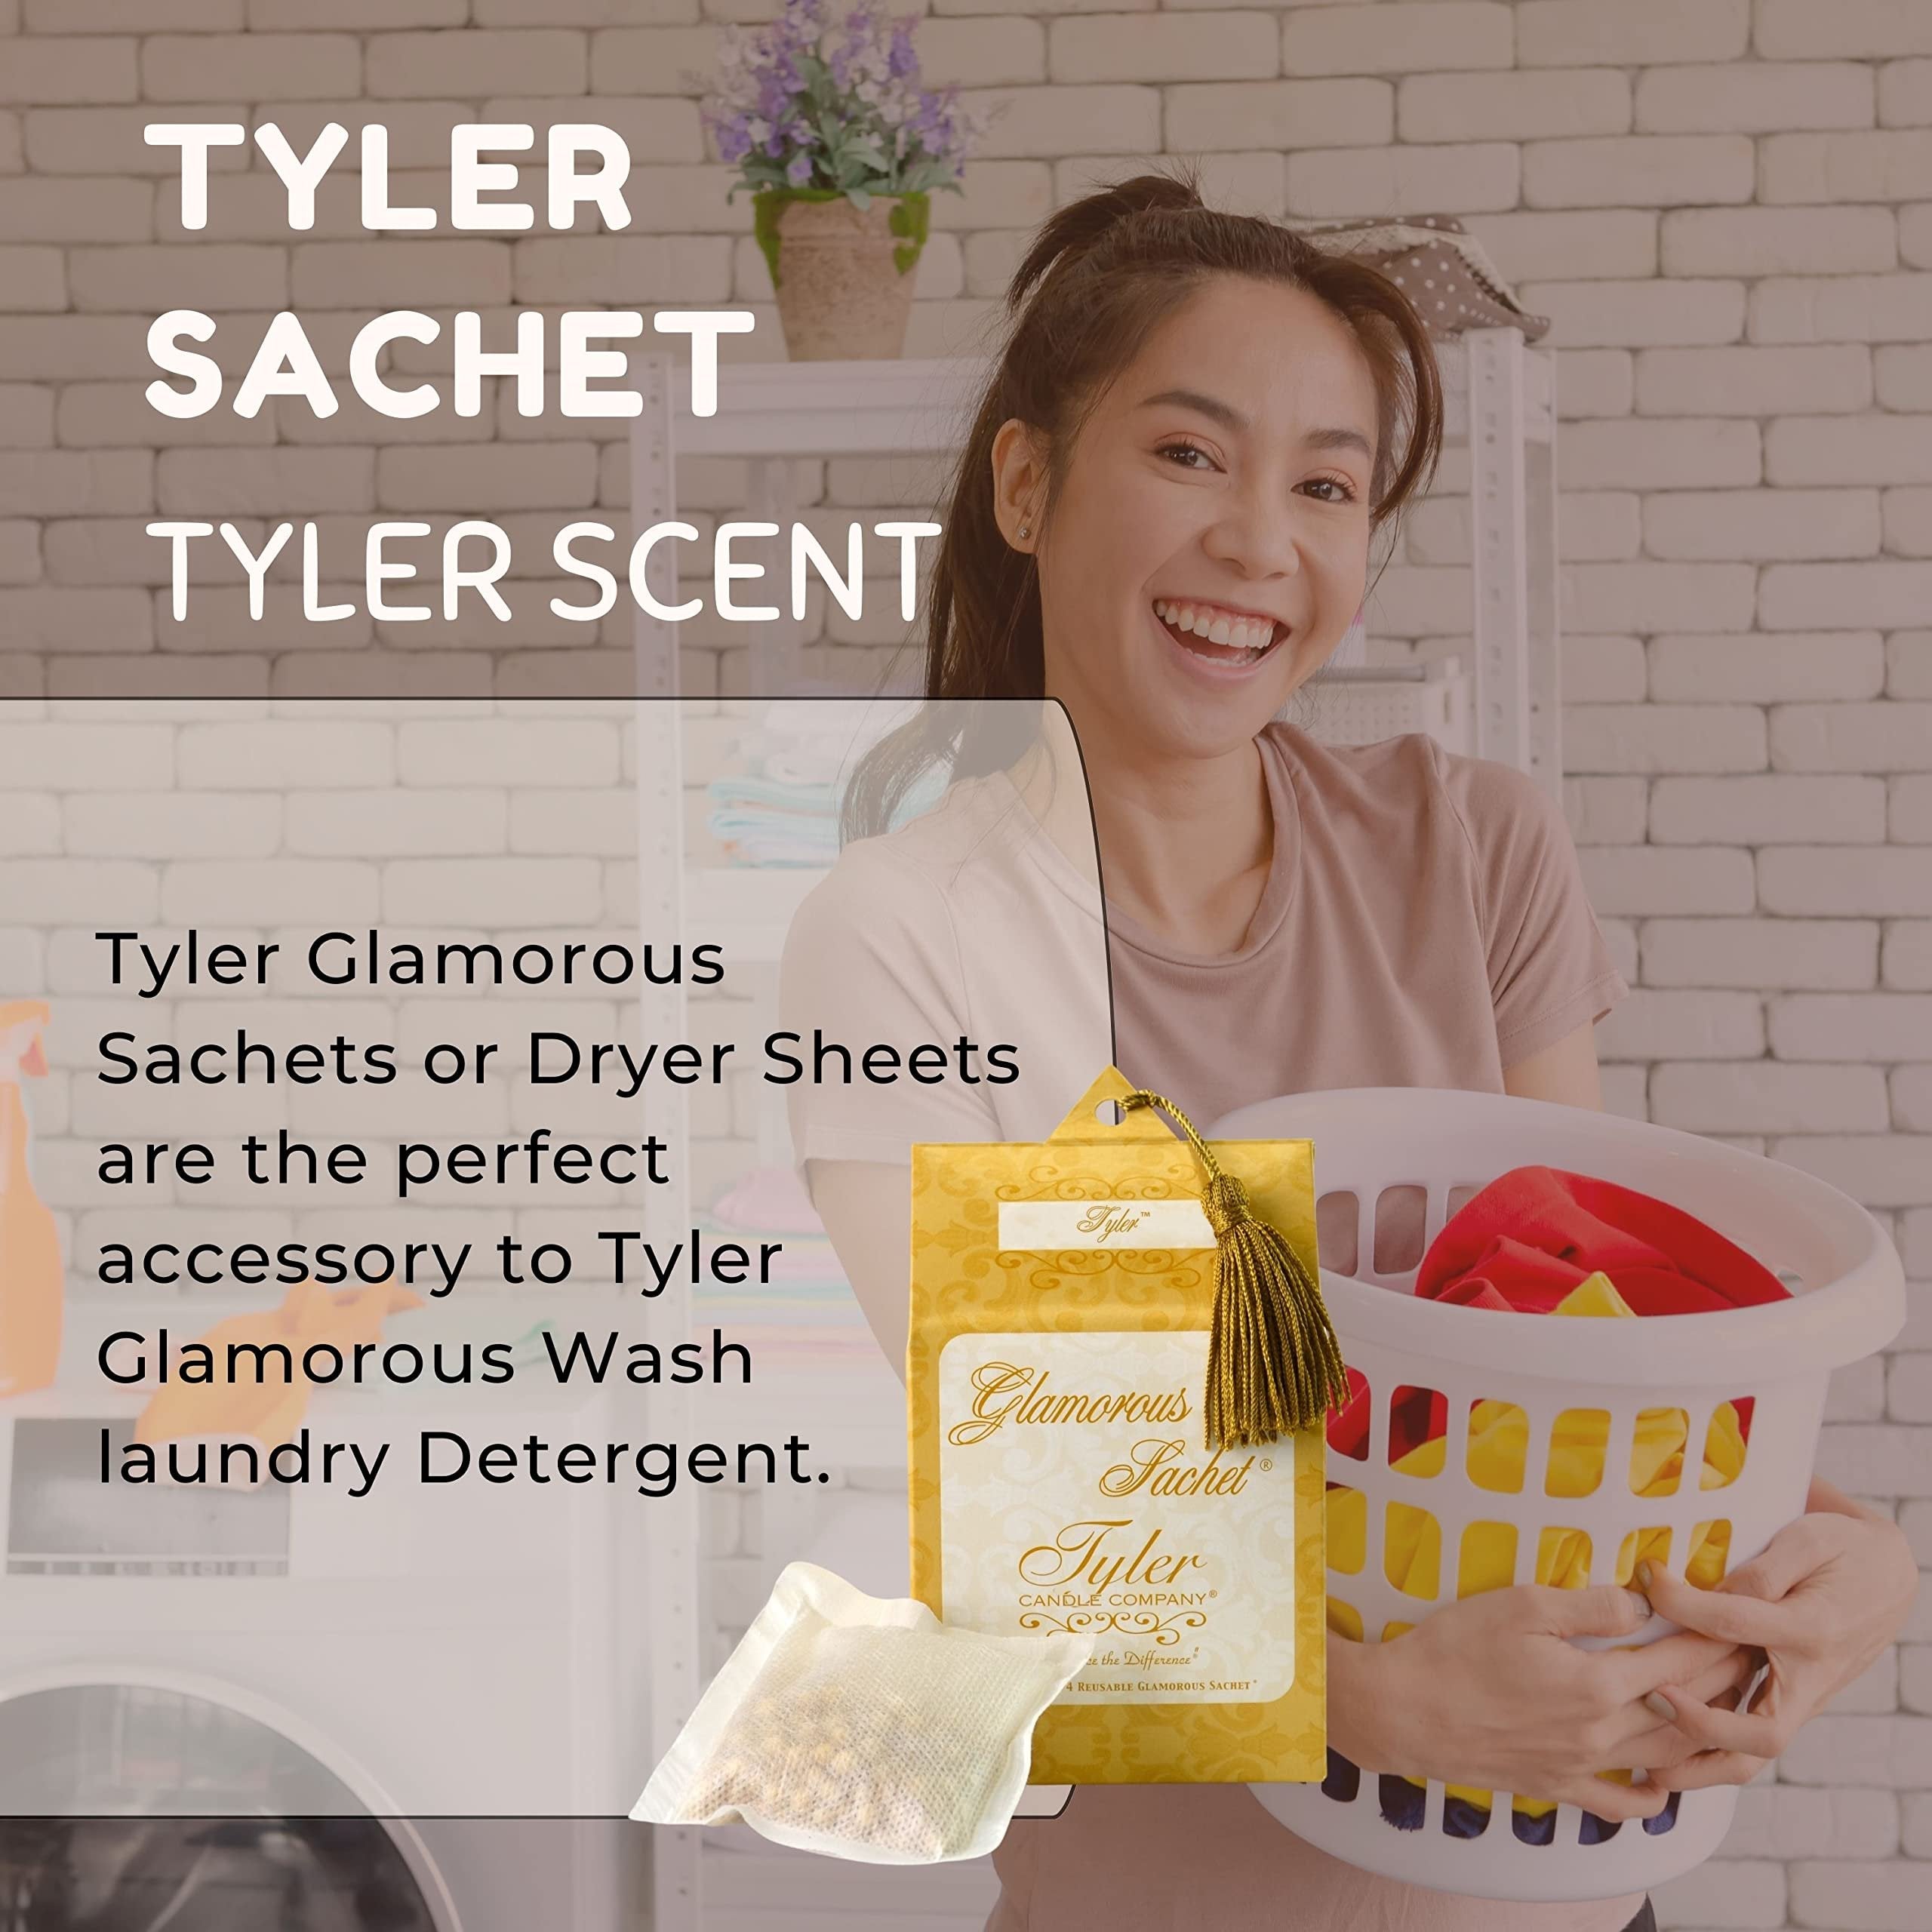 Tyler Candle Company Tyler Scent Dryer Sheet Sachets - Glamorous Reusable Dryer Sheets - Sachets for Drawers and Closets - 1 Pack, 4 Sachets, Dryer, Home, or Personal Sachet, with Bonus Key Chain